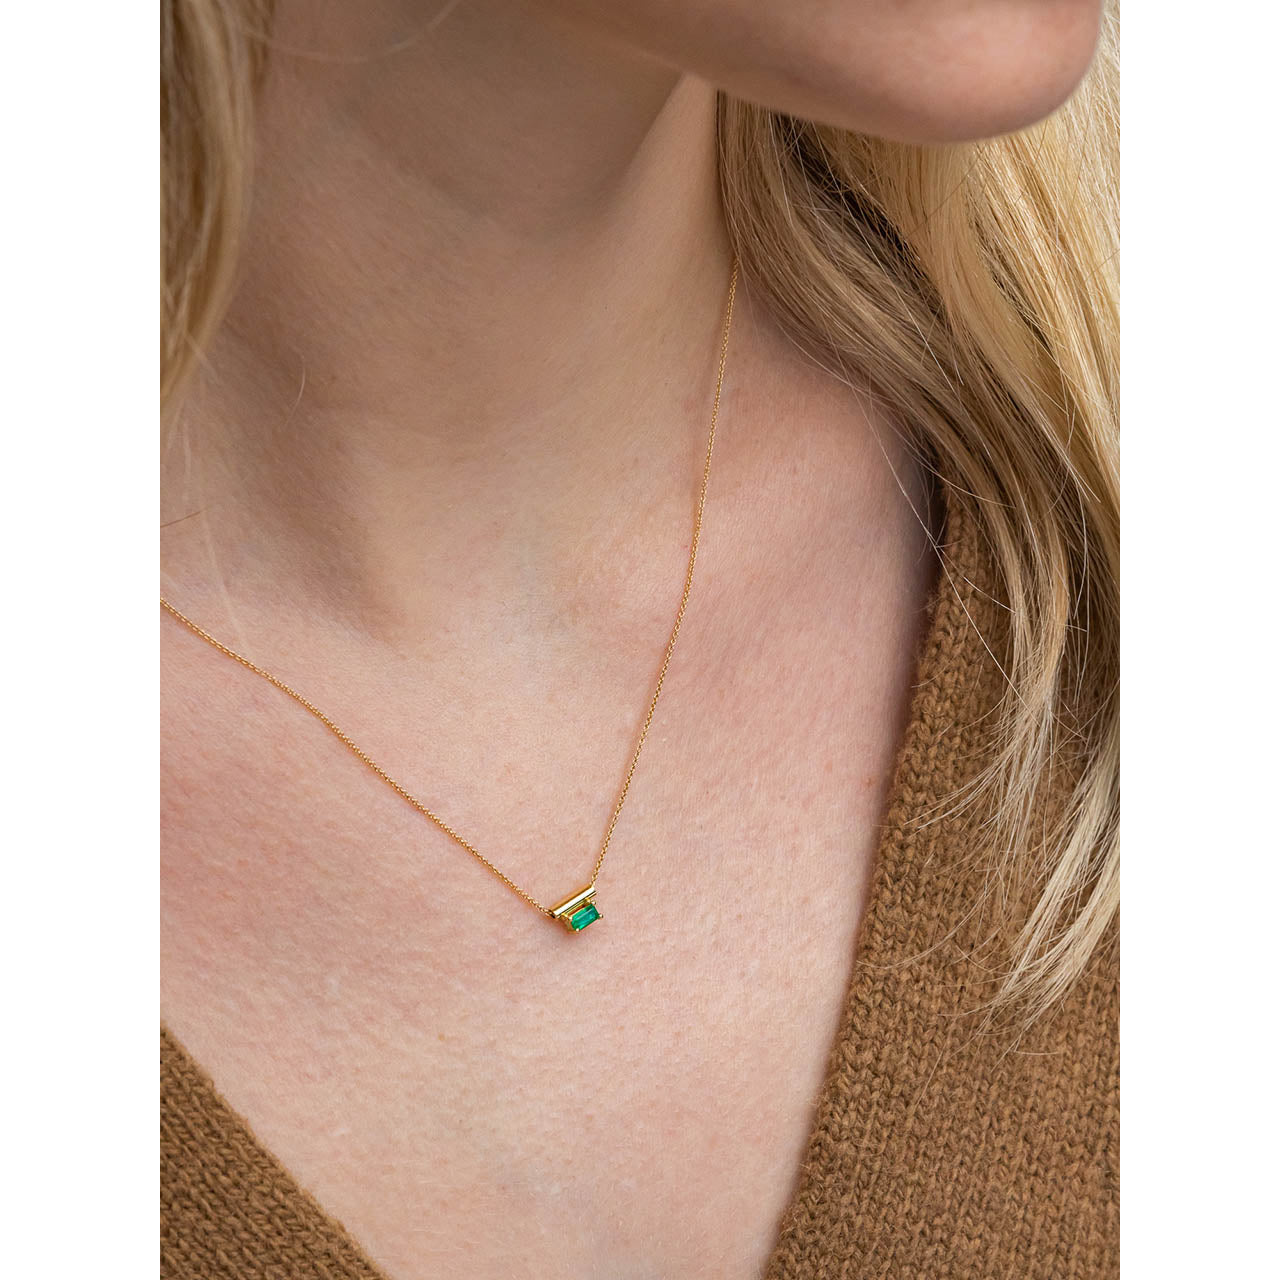 18K nora necklace